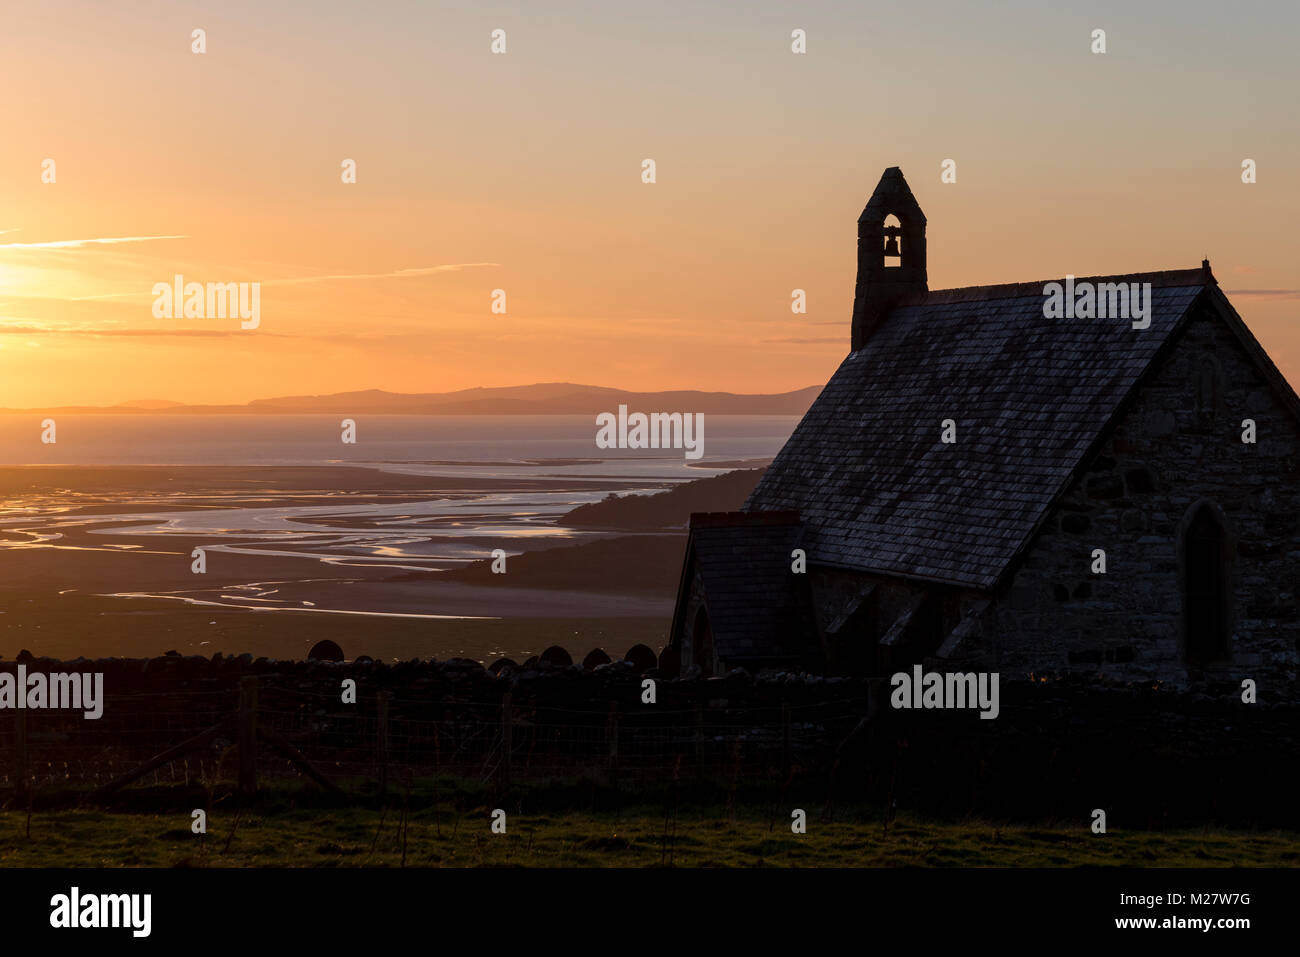 St Tecwyn's church at sunset. A small church high in the hills above the Dwyryd estuary near Harlech in Snowdonia, North Wales. Stock Photo